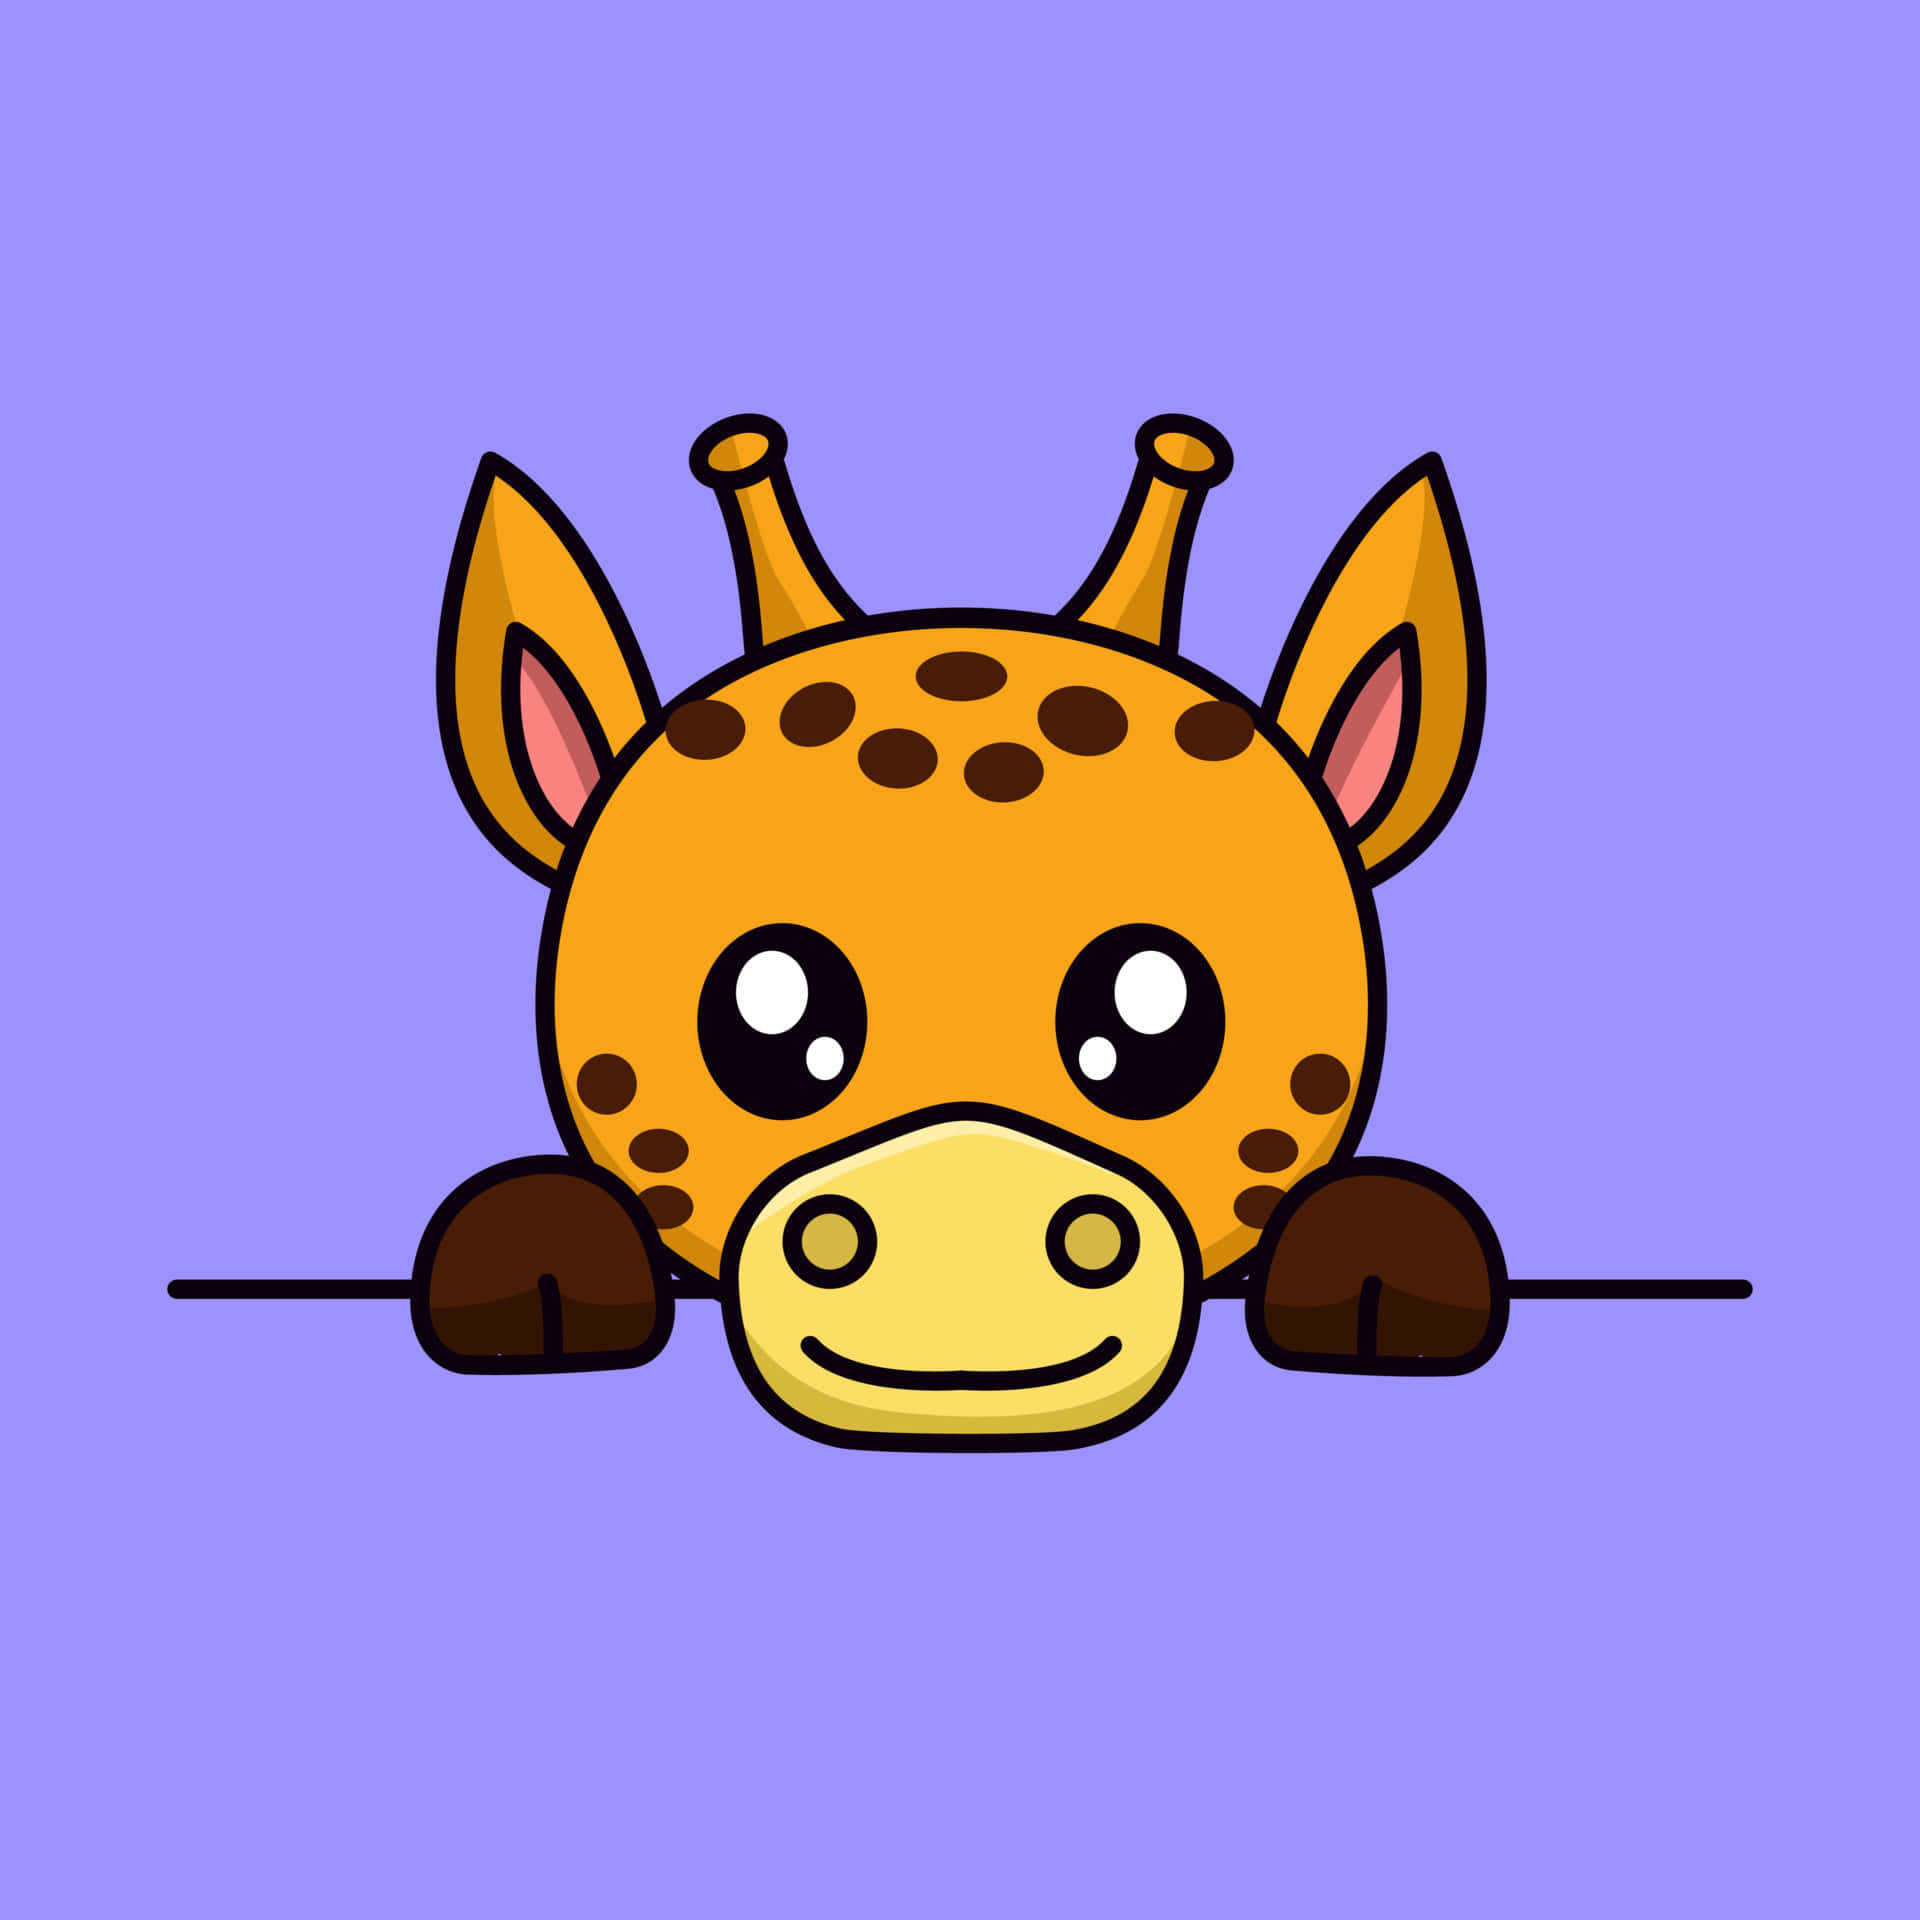 Adorable Kawaii Giraffe with a Colorful Background Wallpaper